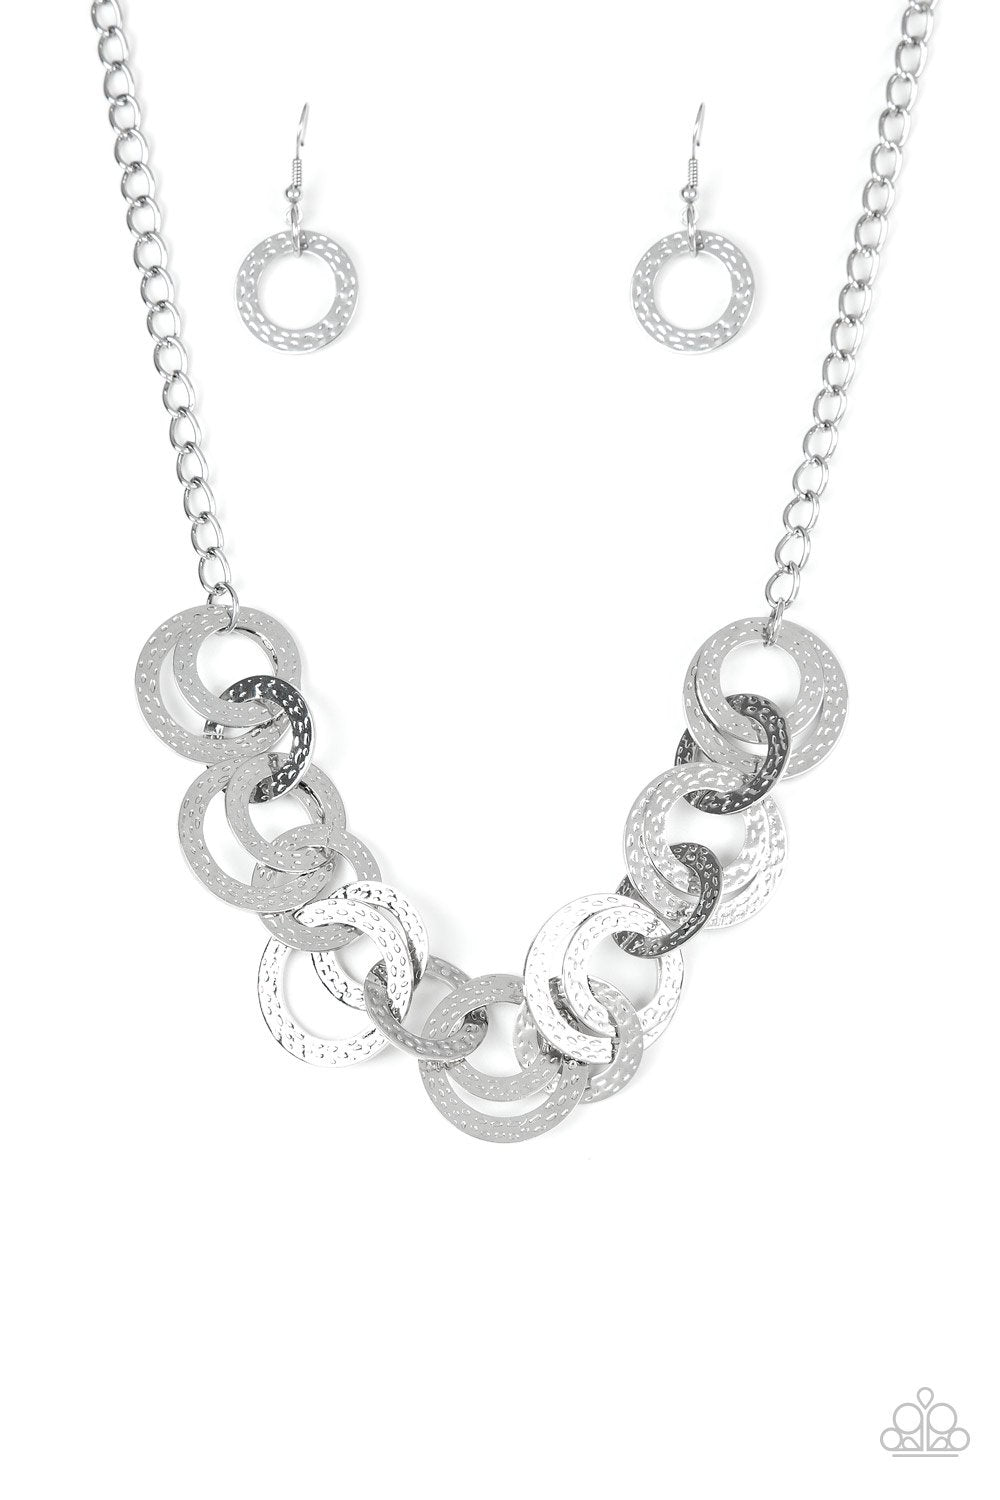 Treasure Tease Silver Necklace - Paparazzi Accessories- lightbox - CarasShop.com - $5 Jewelry by Cara Jewels